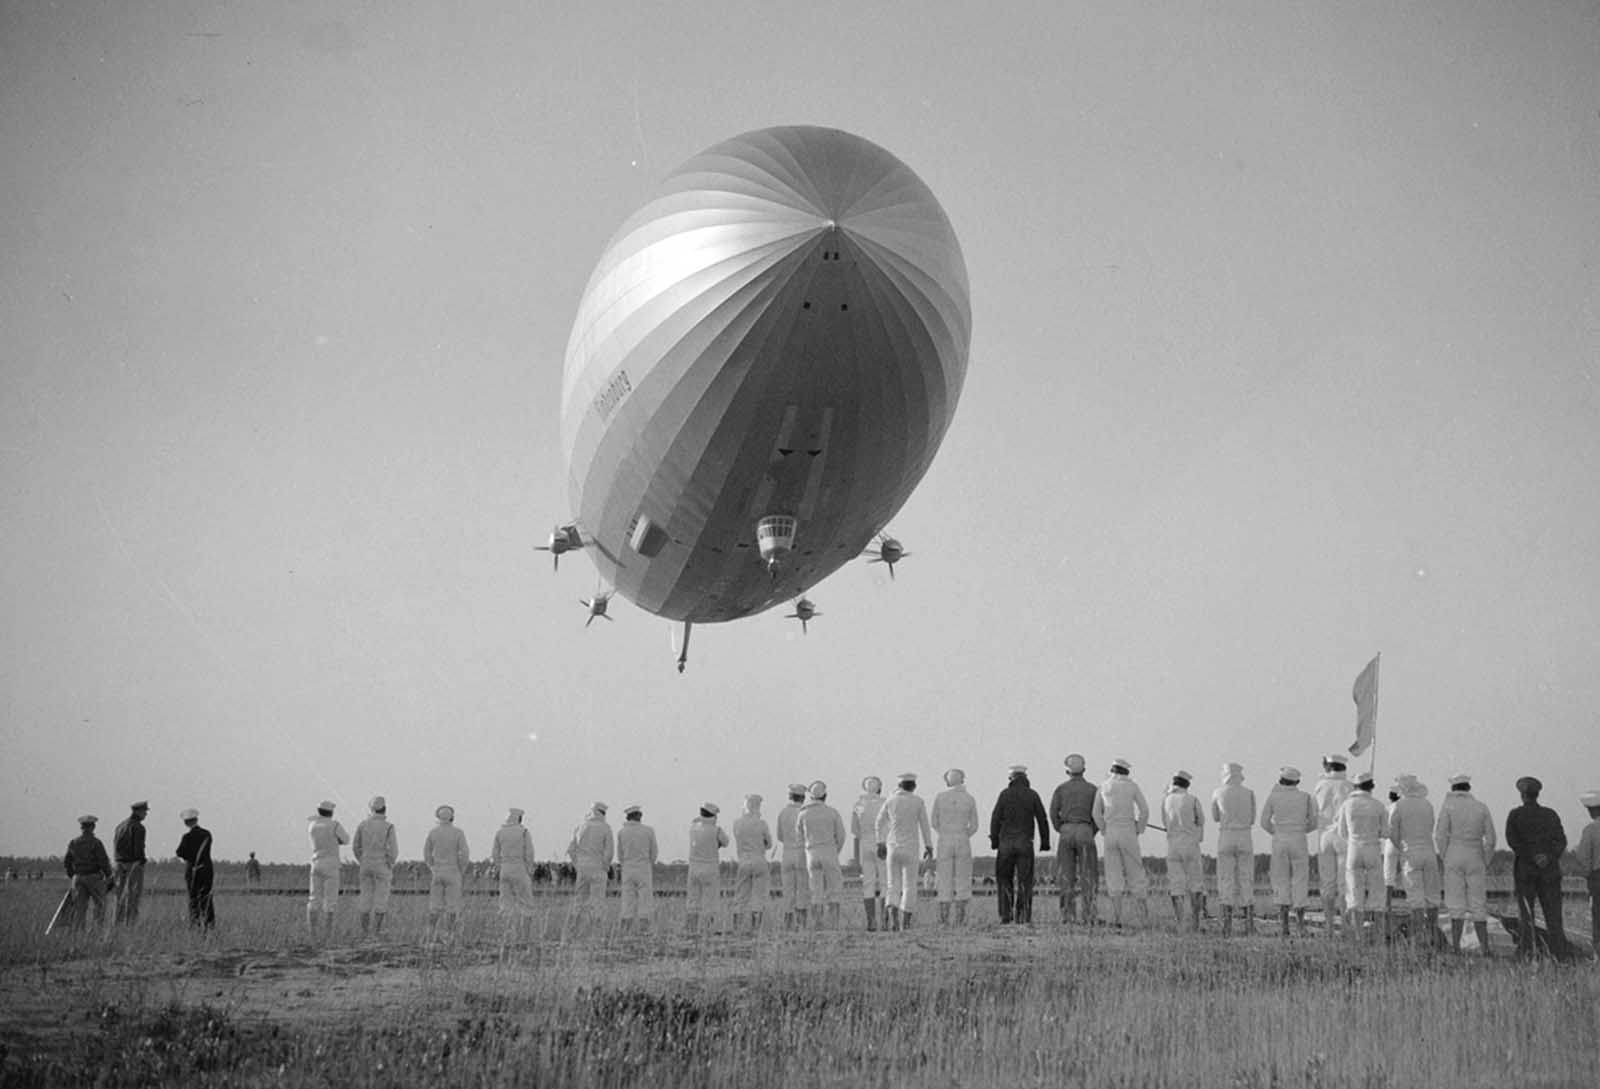 The Hindenburg, above ground crew at the U.S. Navy Air Station in Lakehurst, New Jersey.